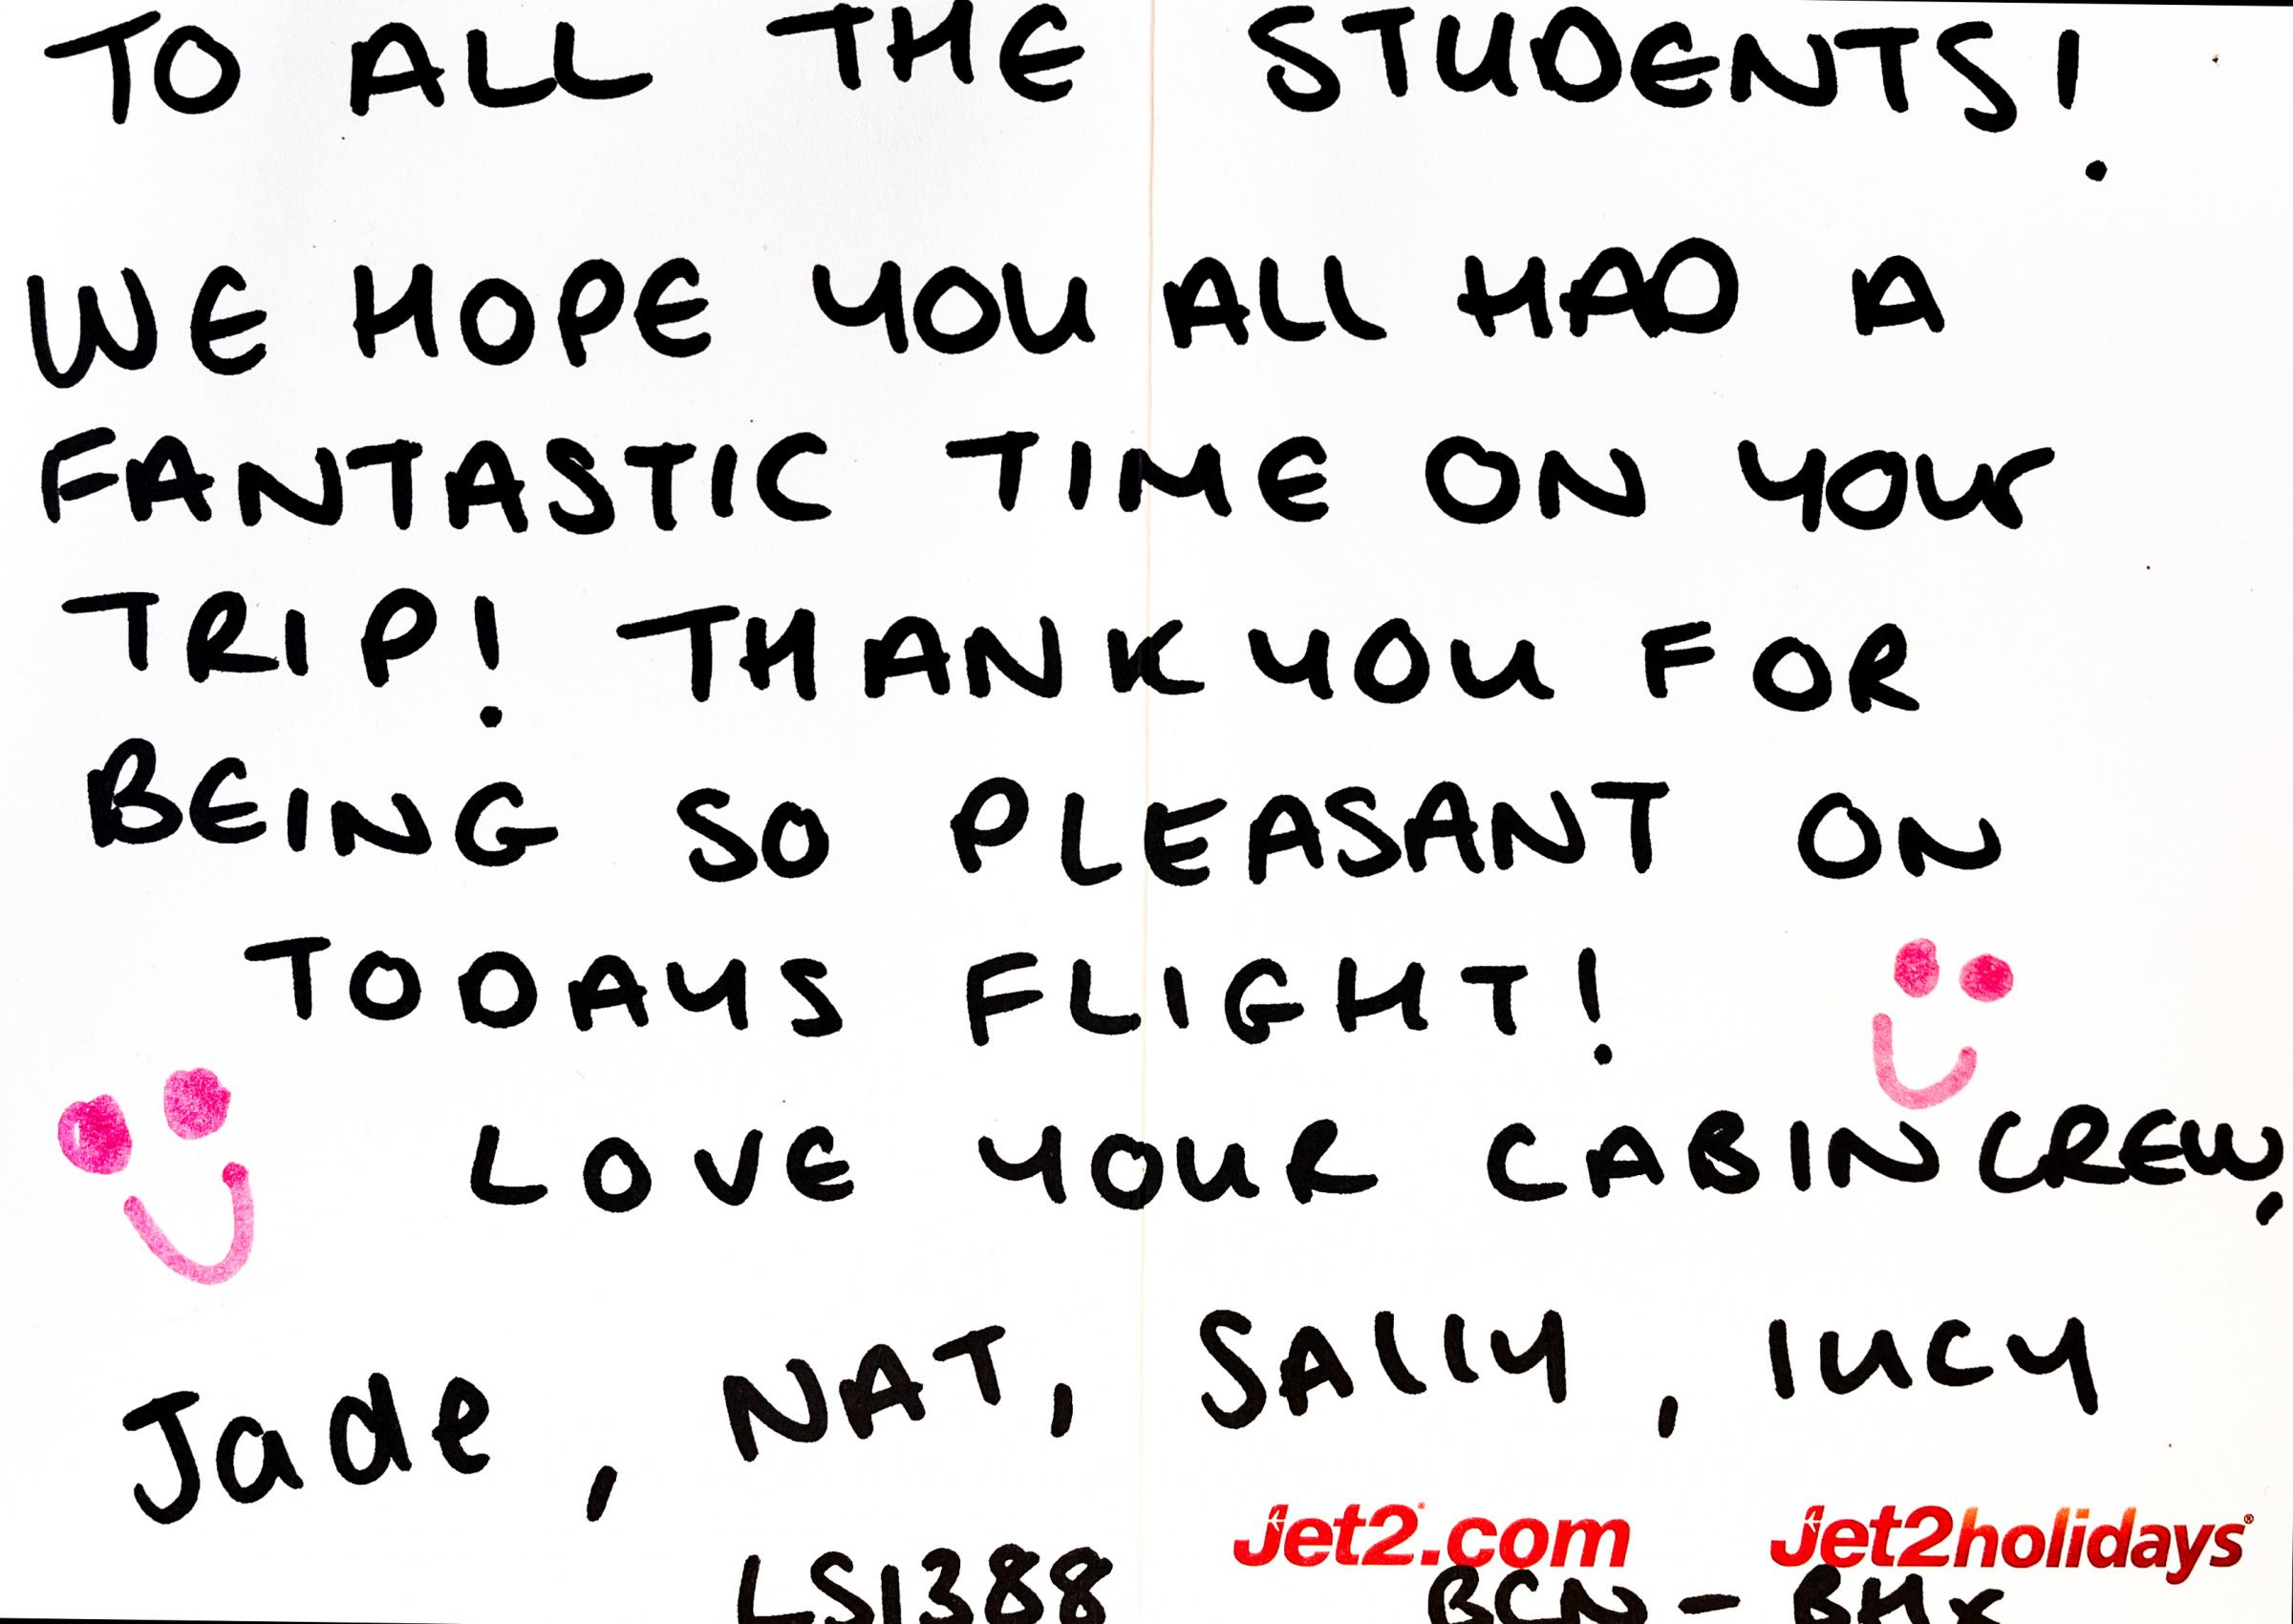 The Jet2 staffs thoughtful note for Darland students.